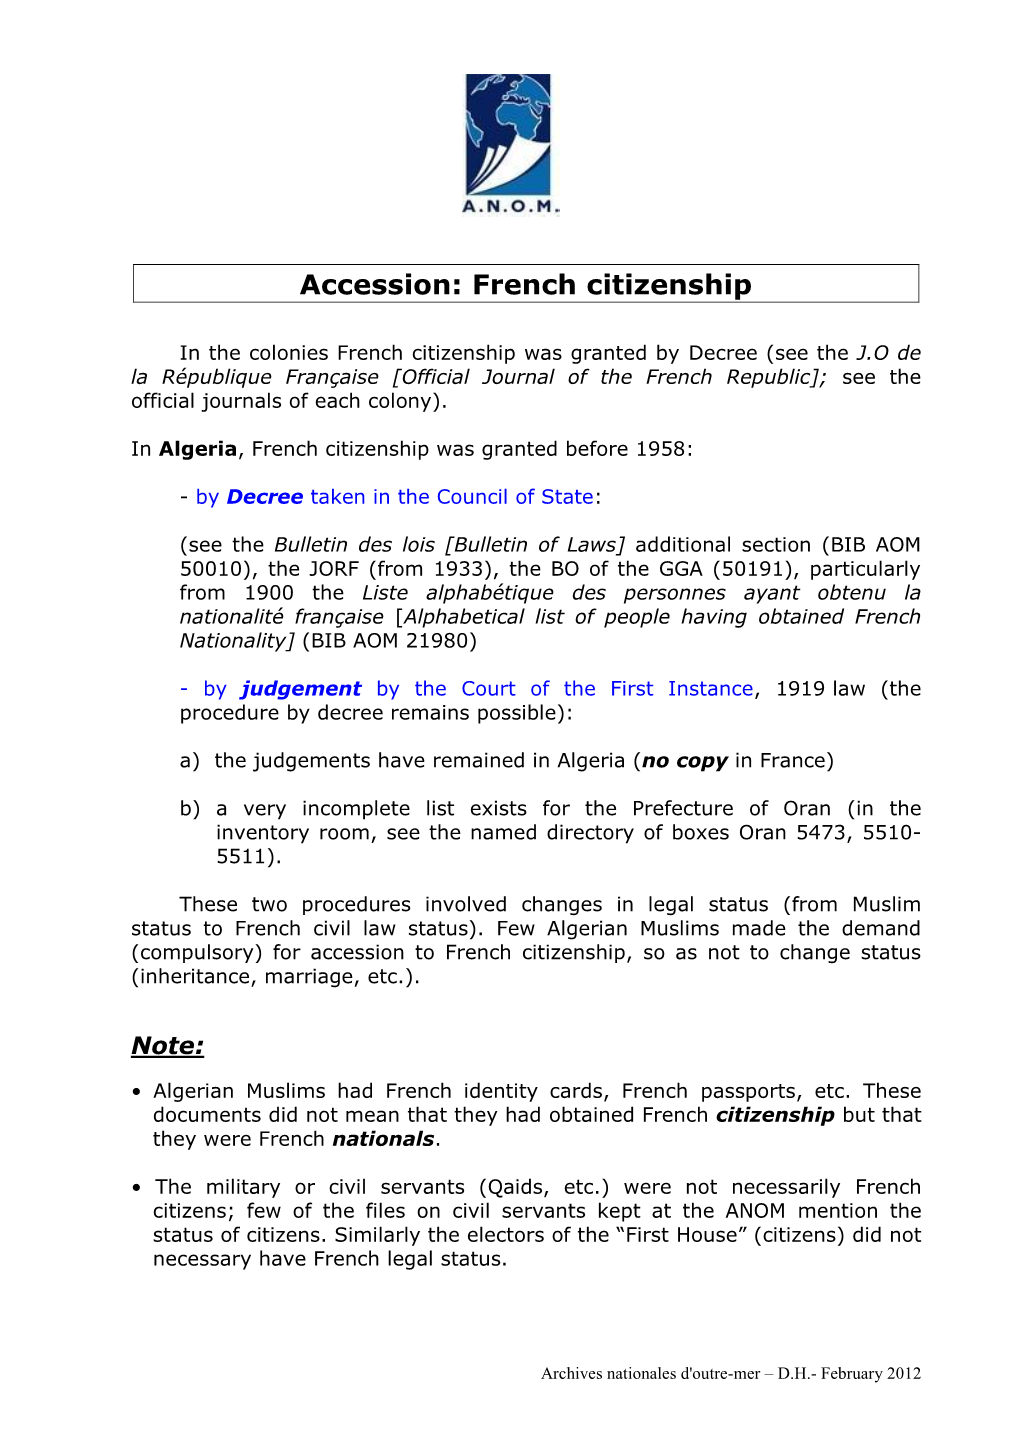 Accession: French Citizenship